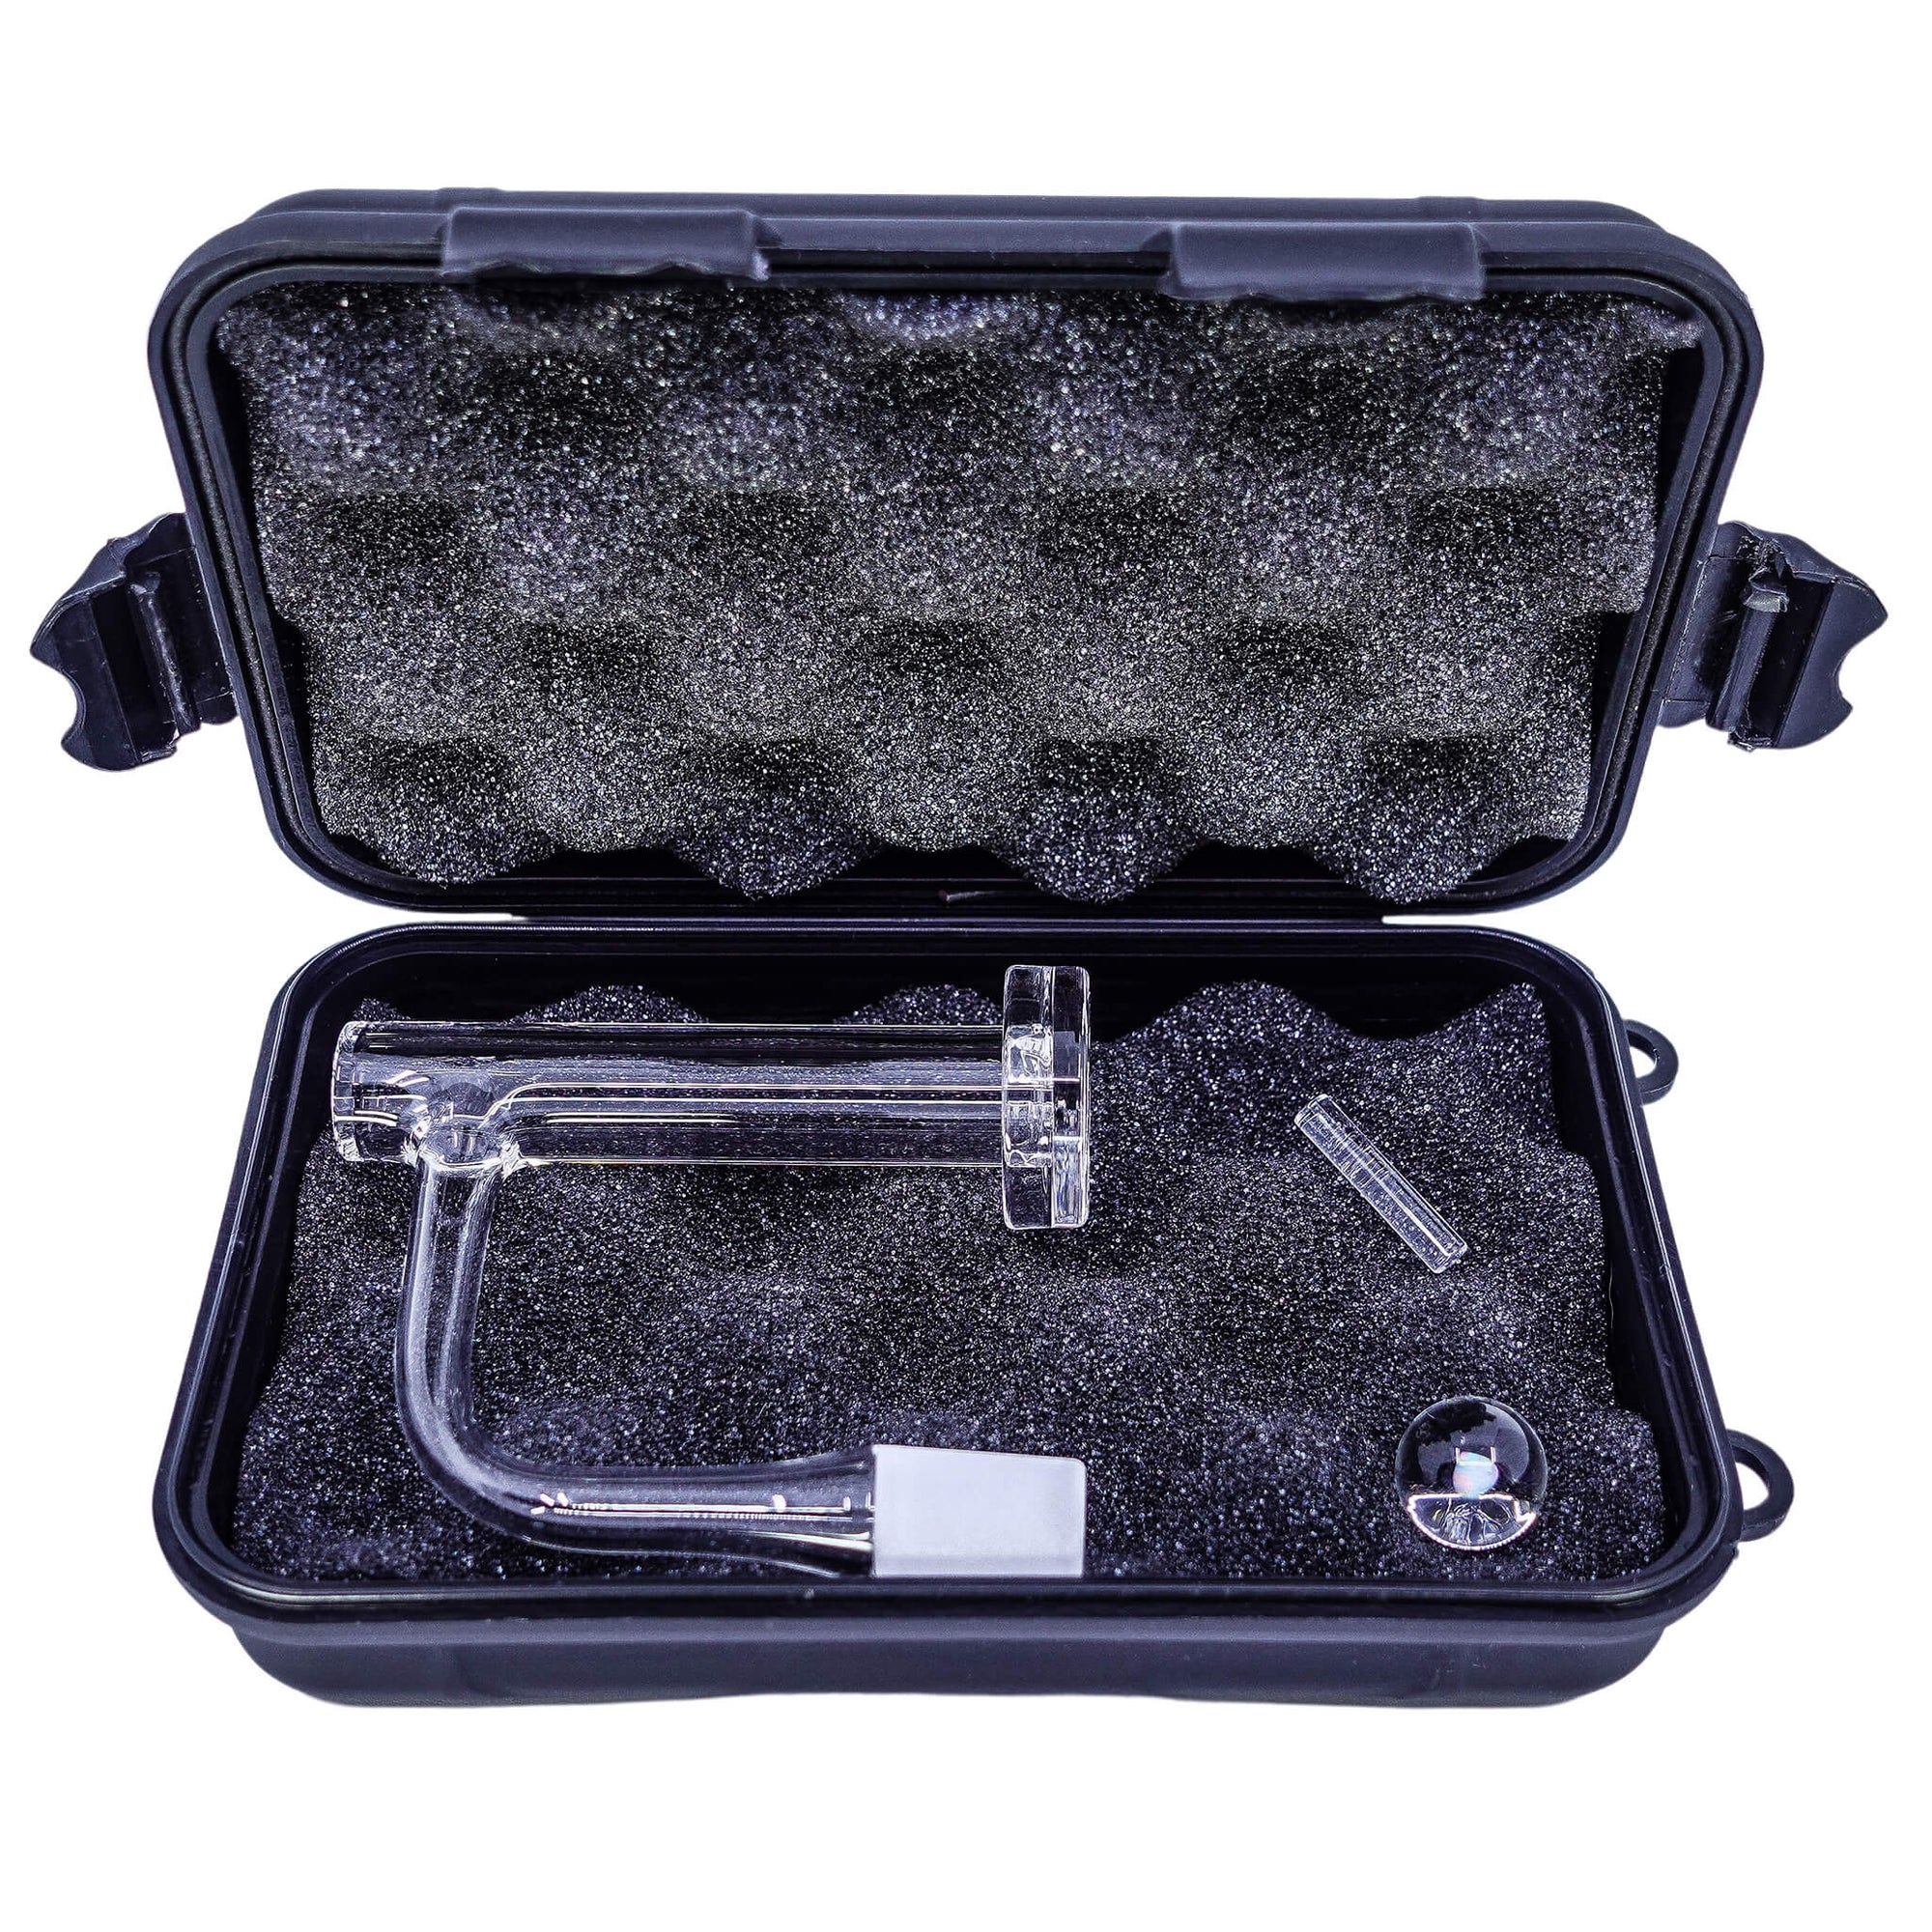 Hard Shell Protective Banger Case | Open Case Storing Two Quartz Bangers | the dabbing specialists